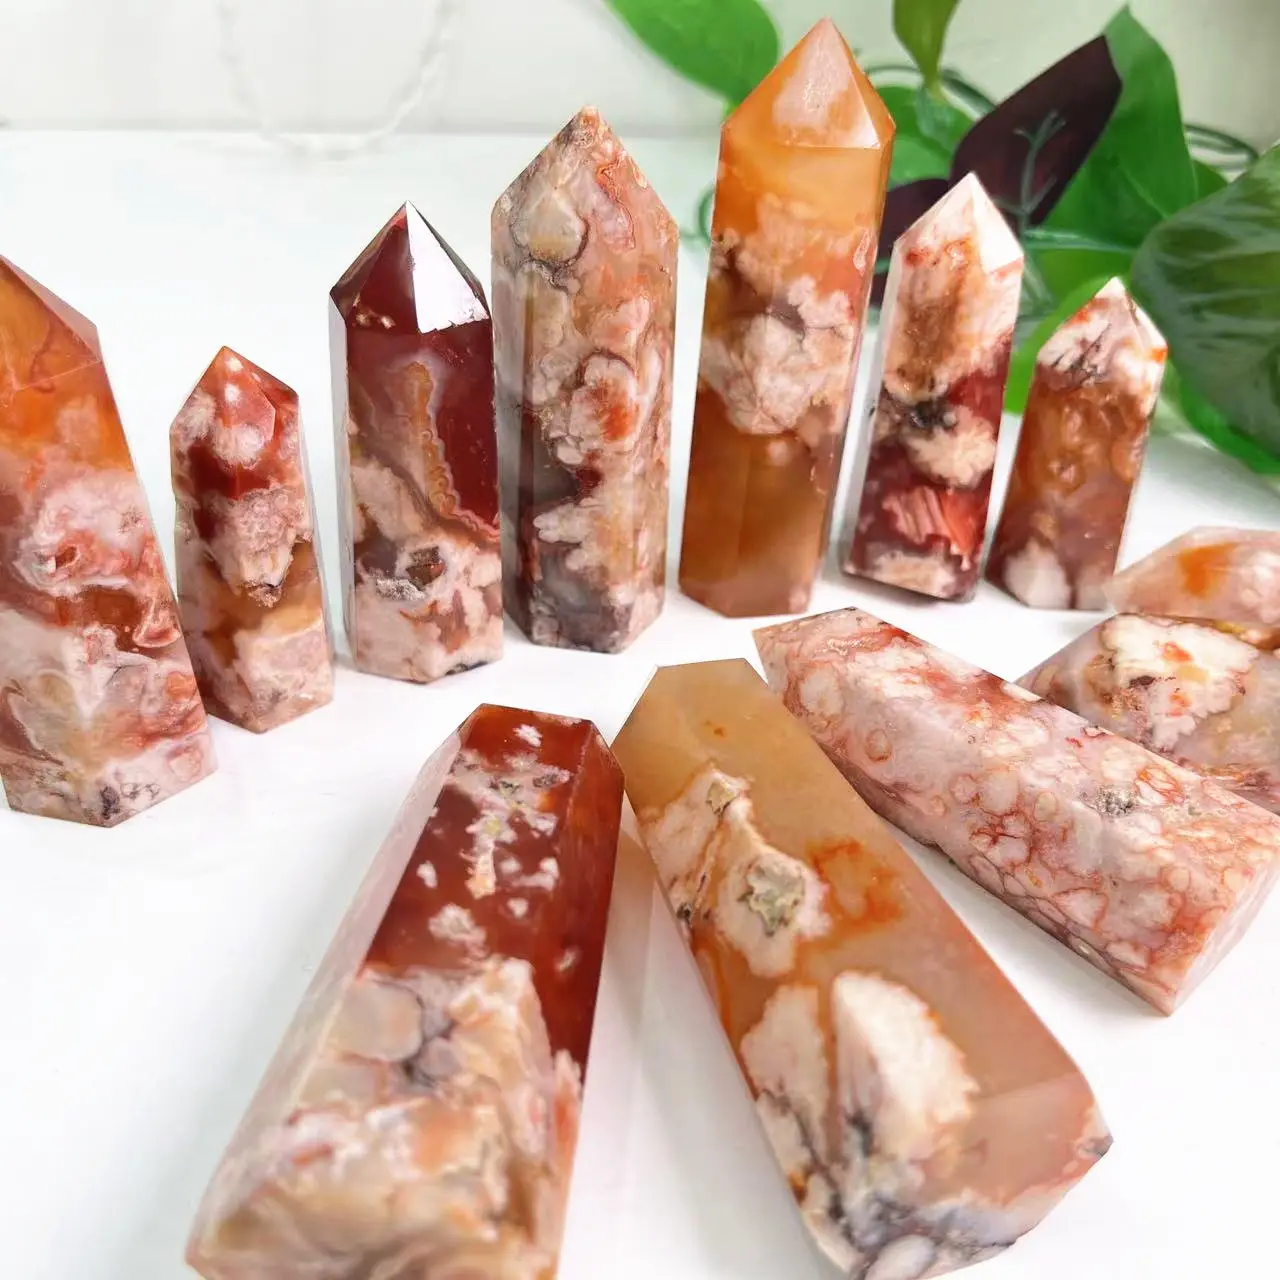 Kindfull Crystal Wholesale Natural Crystals Healing Stones Rose Quartz Points 6-9cm Crystal Wand Points